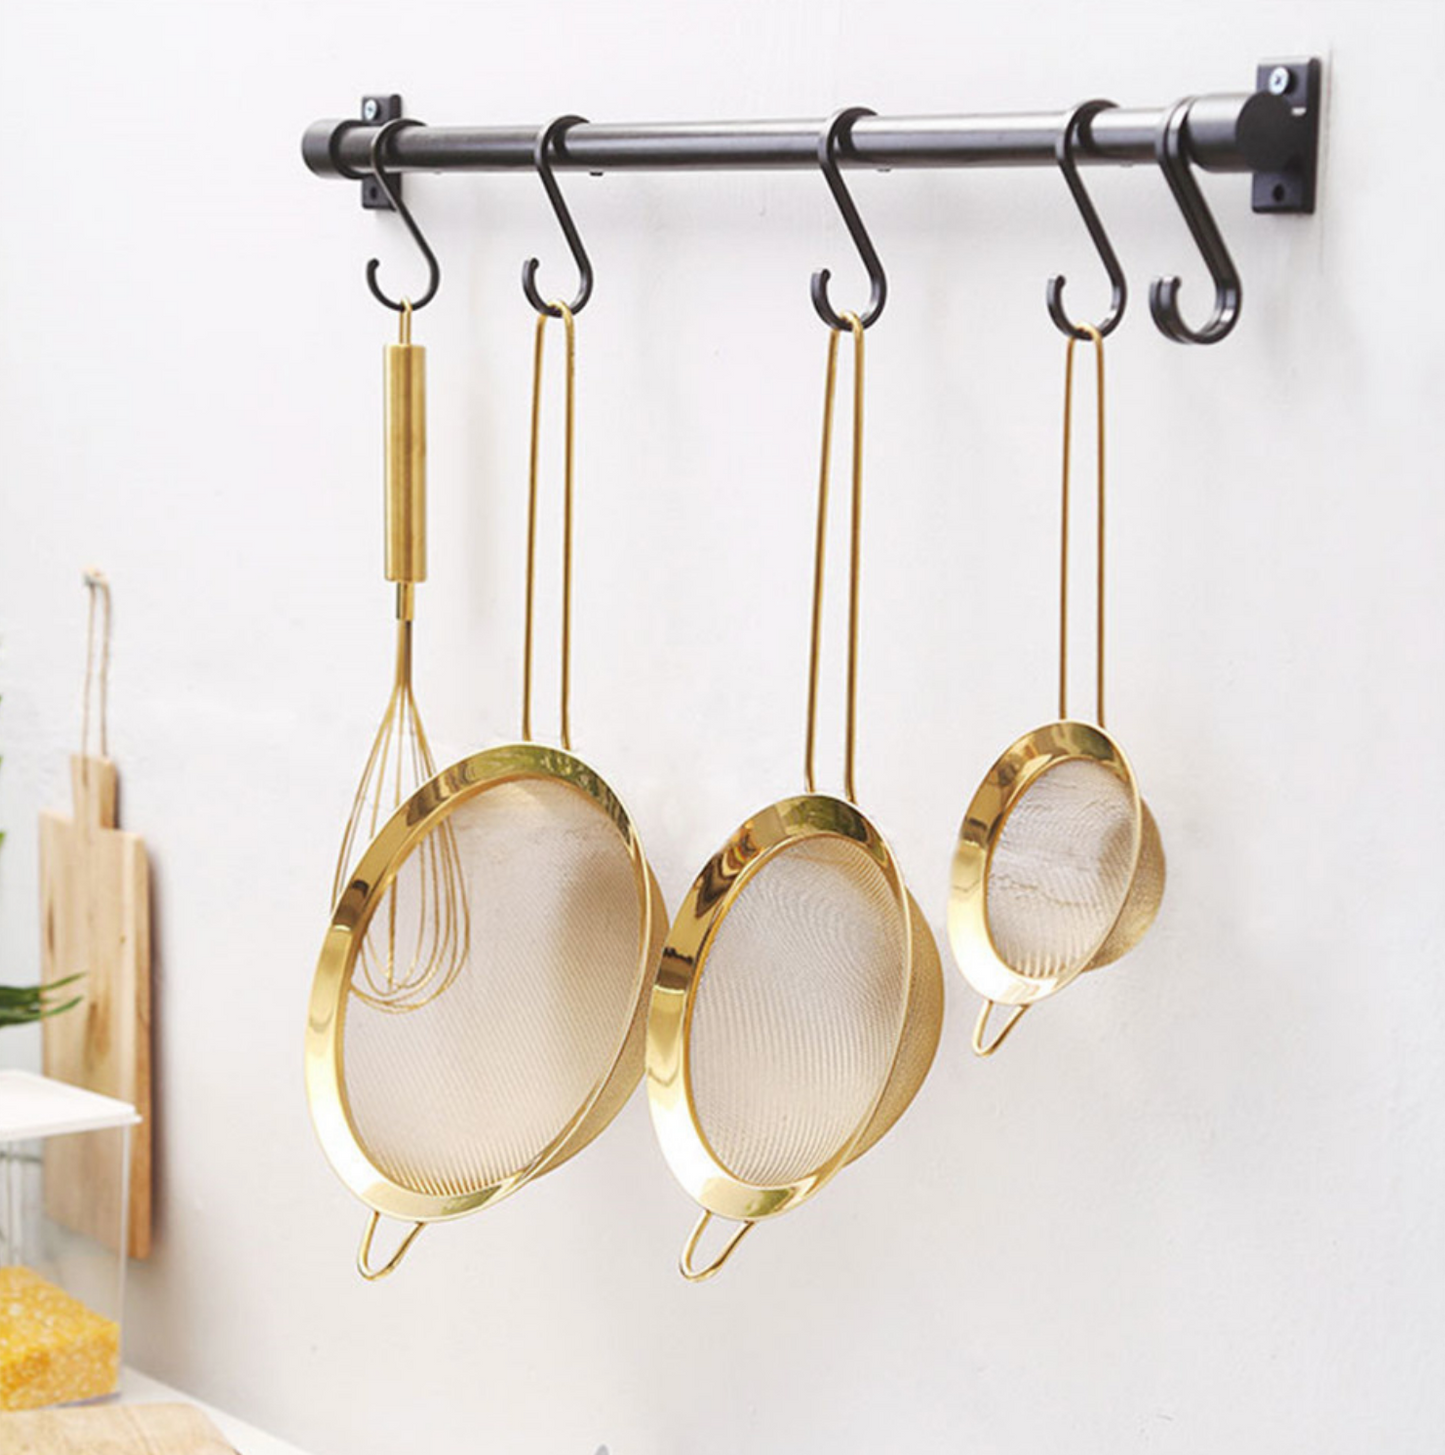 Luxury Gold Sieve - 3 Sizes - Gold or Rose Gold